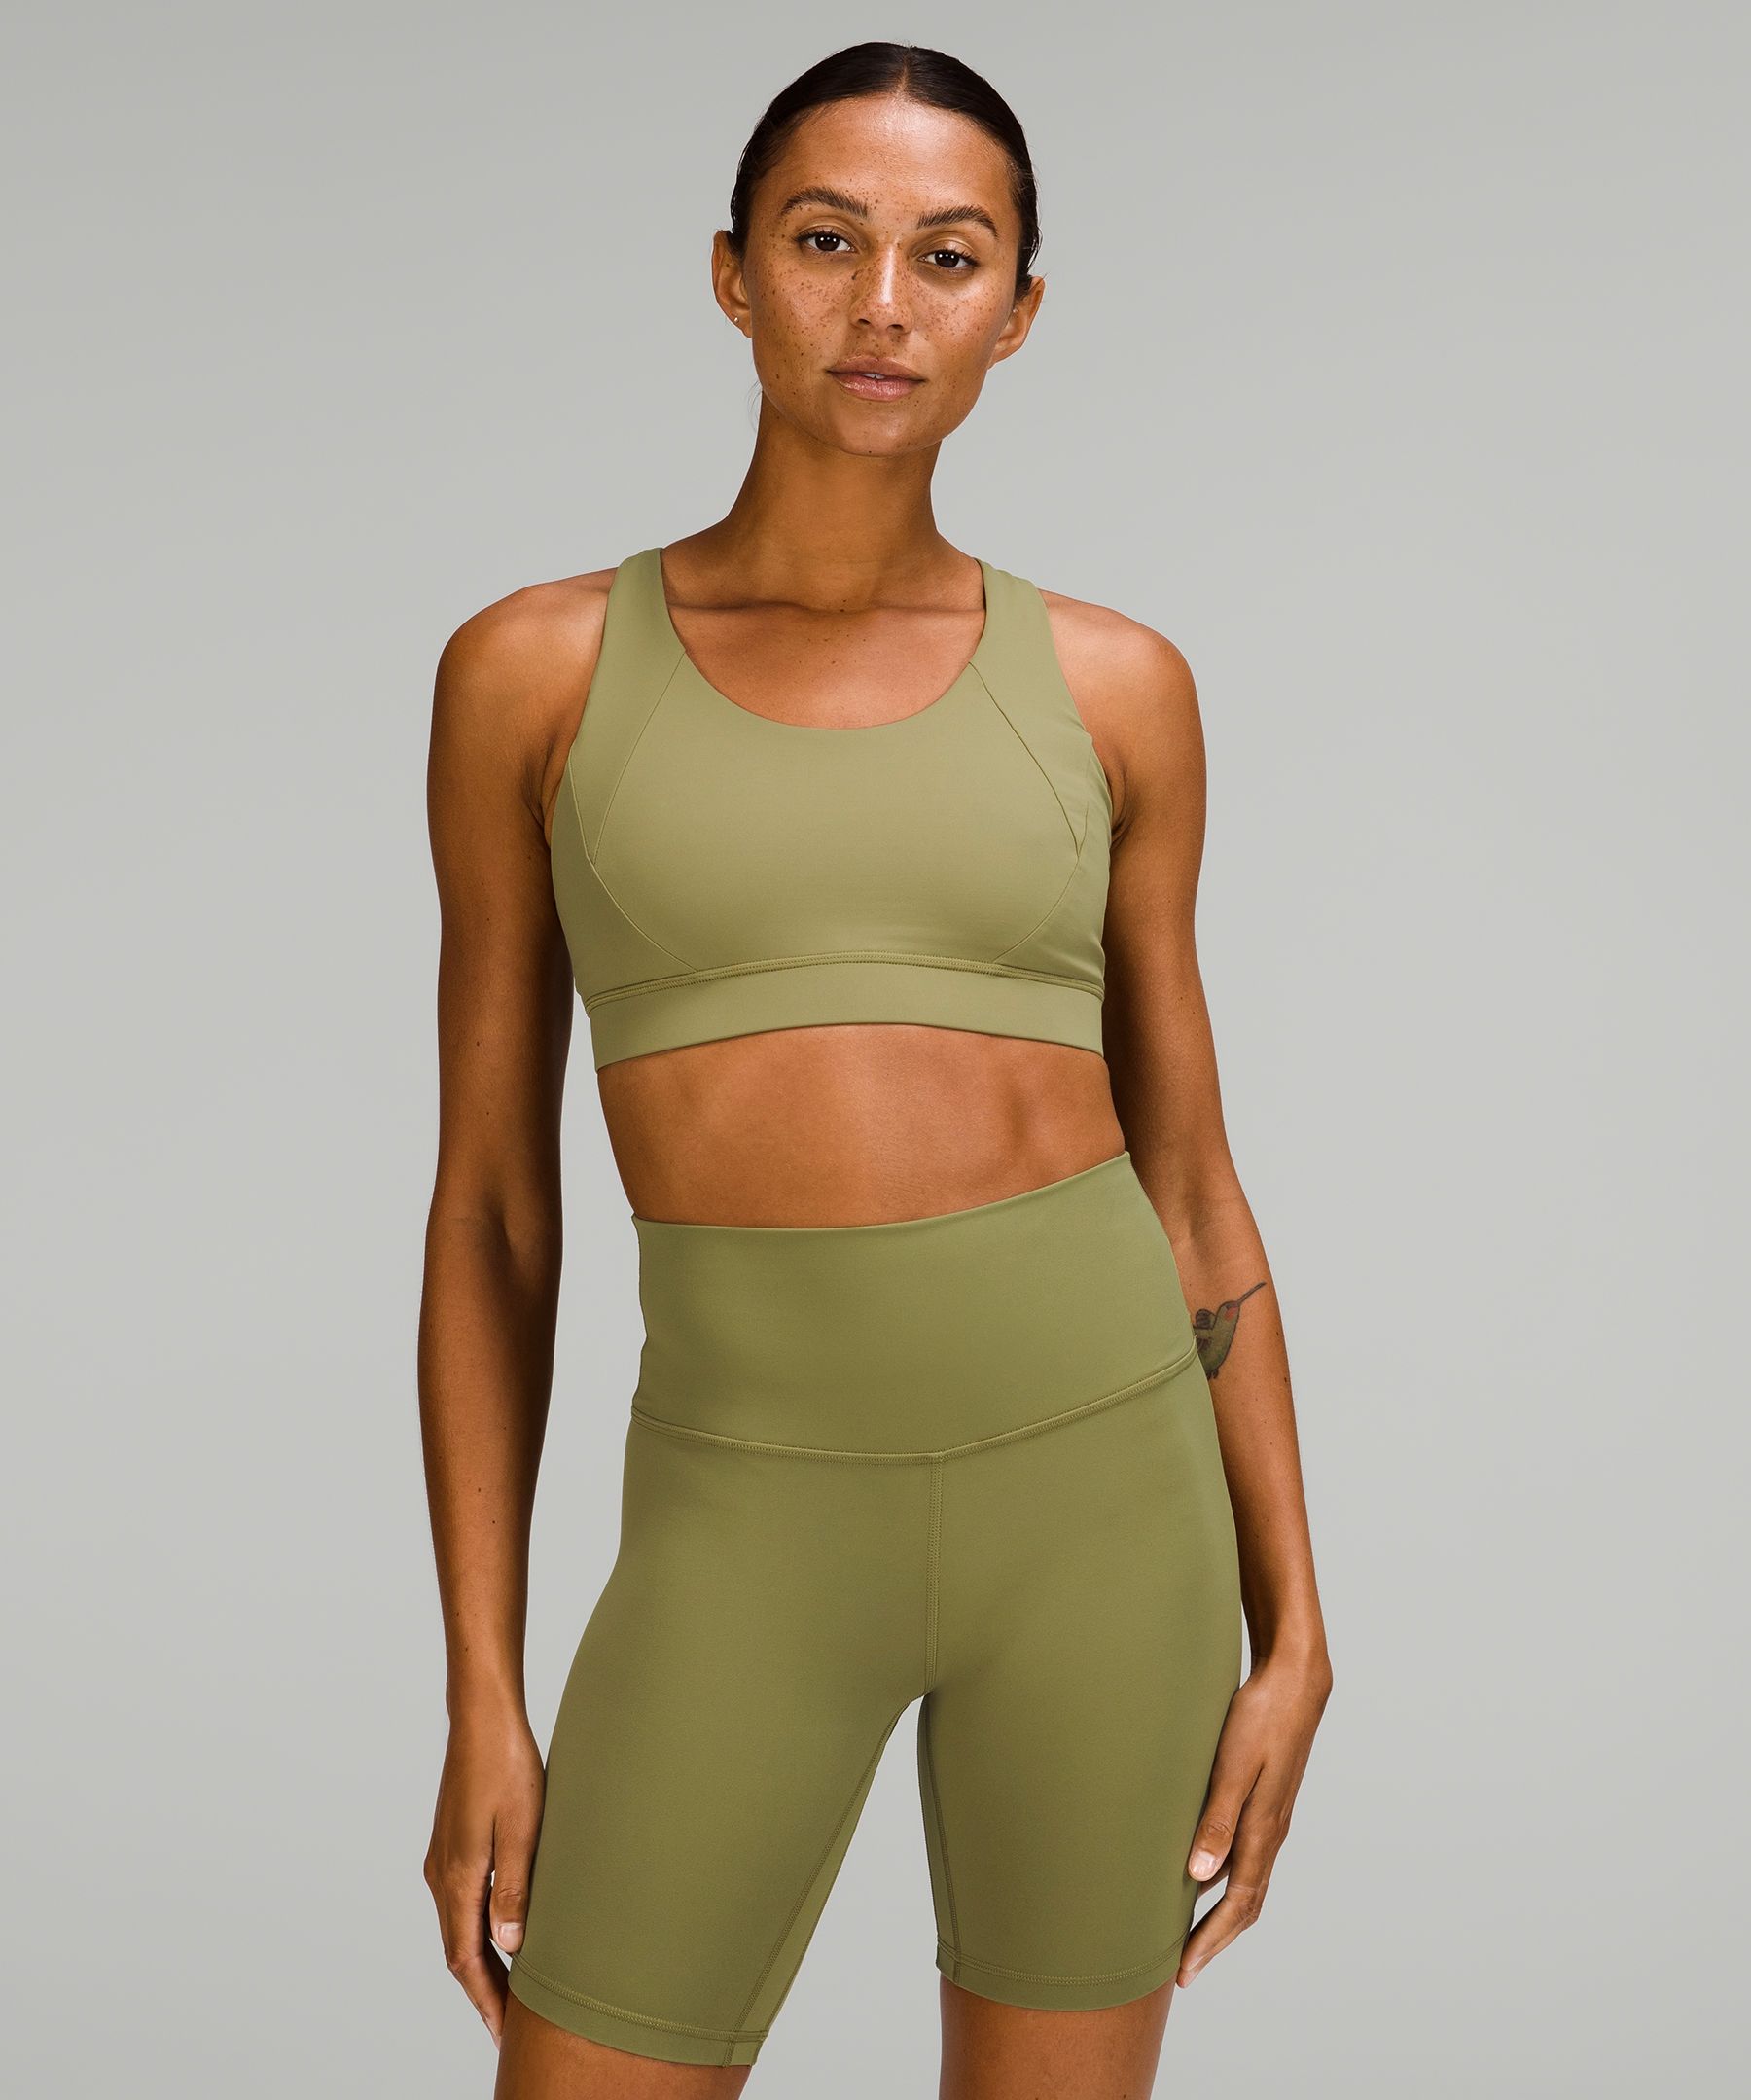 Lululemon Free To Be Elevated Bra Light Support, Dd/ddd(e) Cup In Green